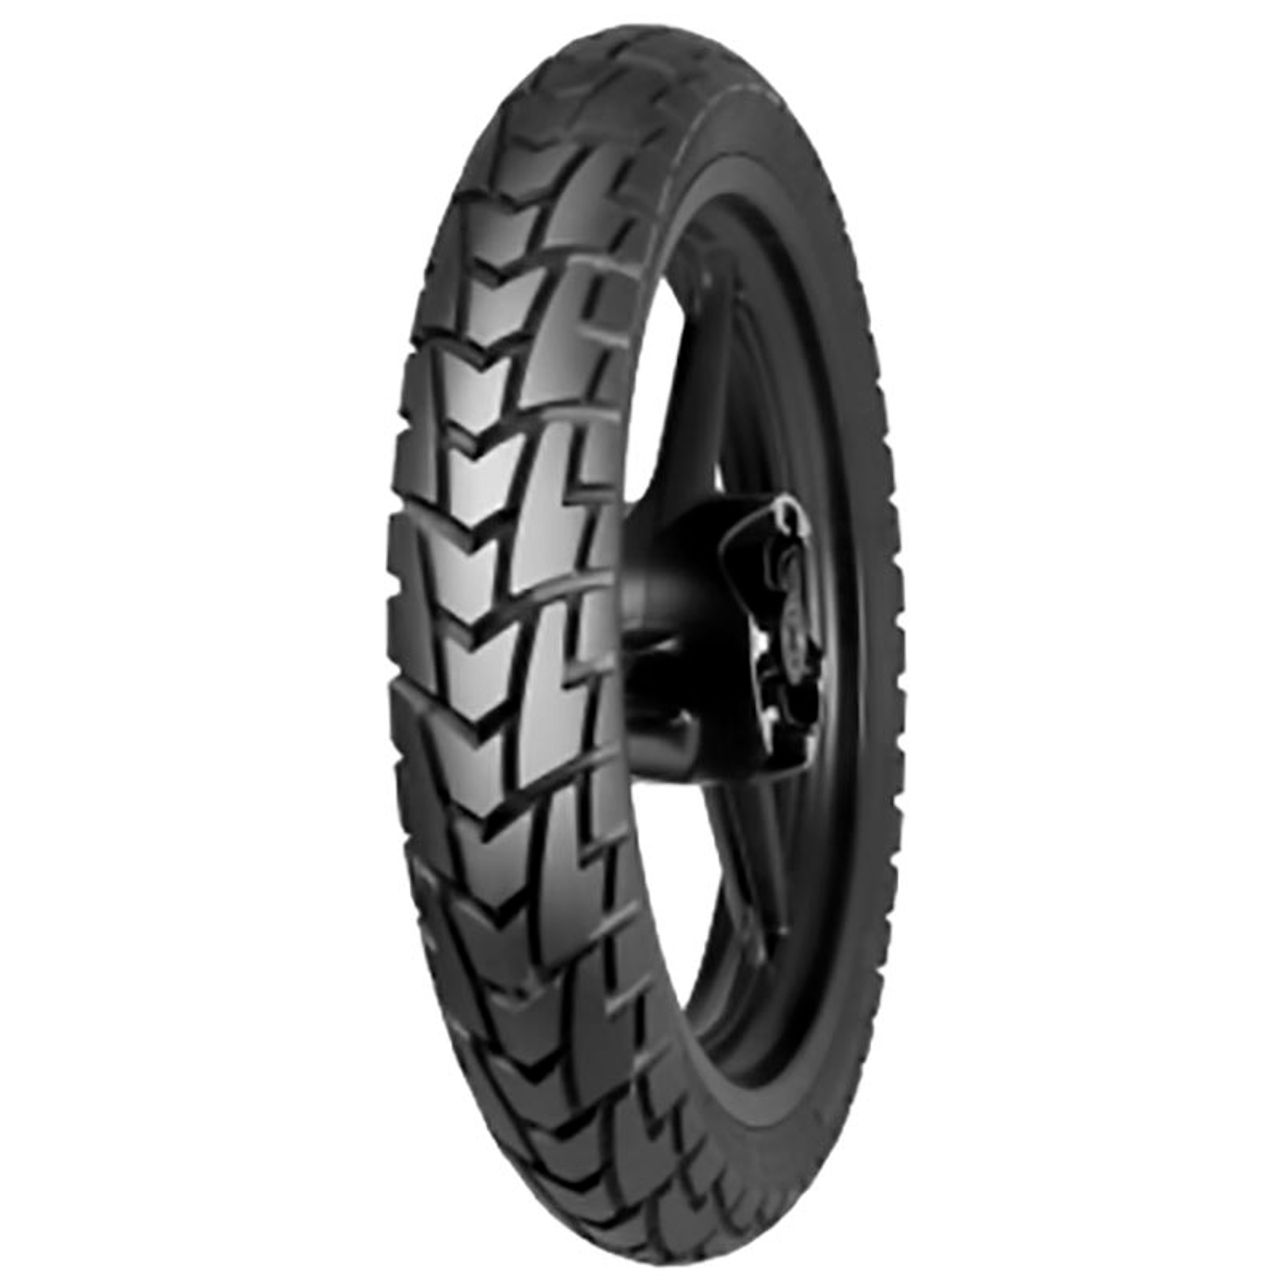 MITAS MC-32 100/80 - 17 M/C TL 52R WINTER WITH SIPES FRONT M+S